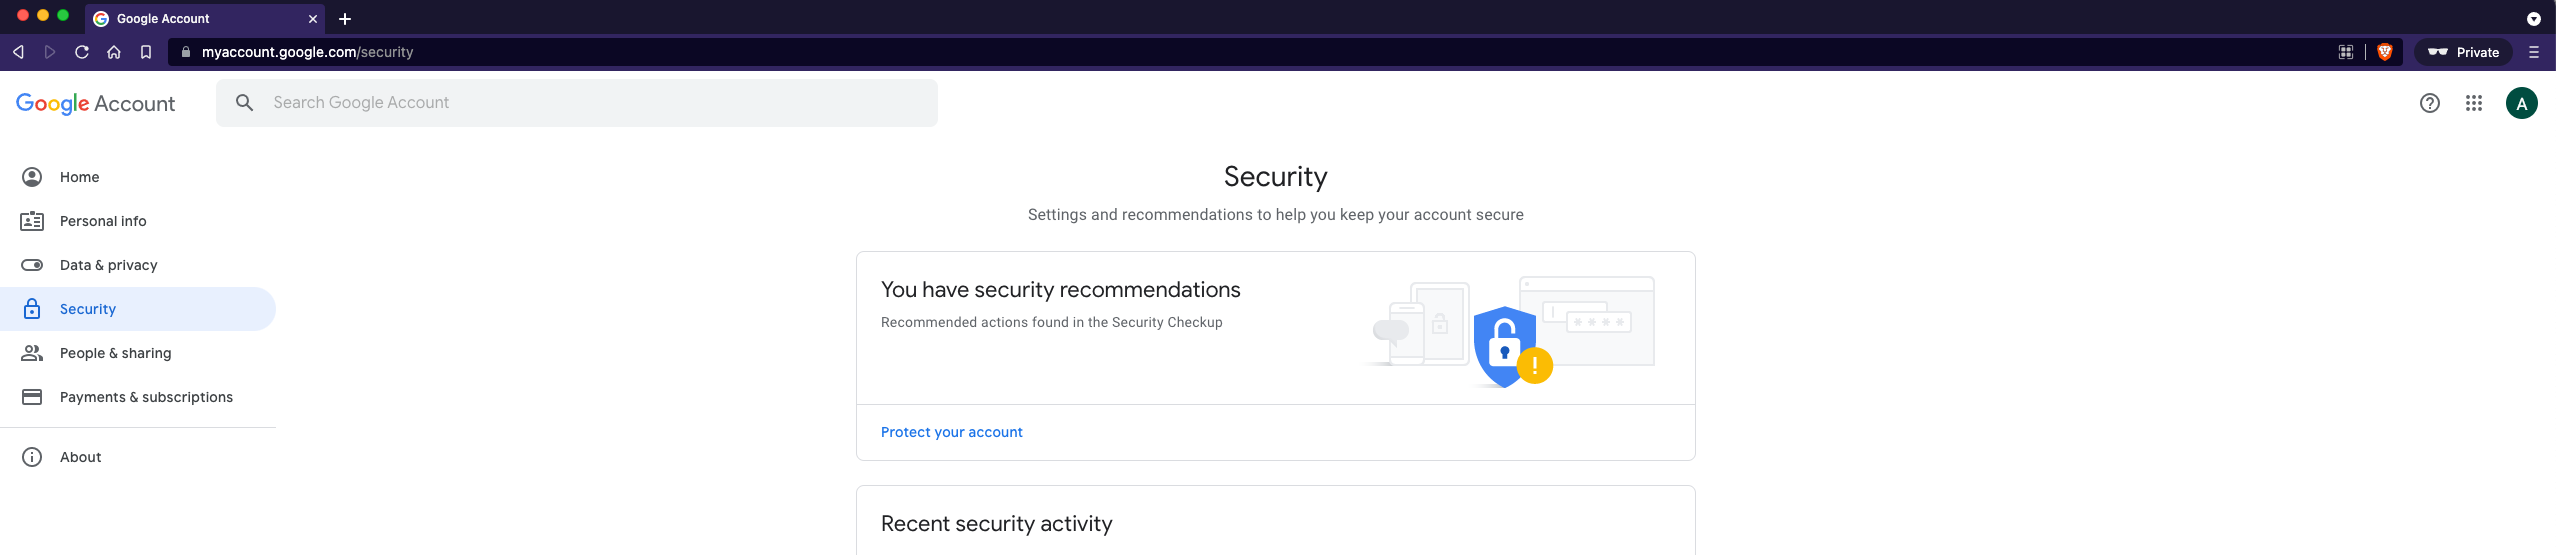 gmail_account_security